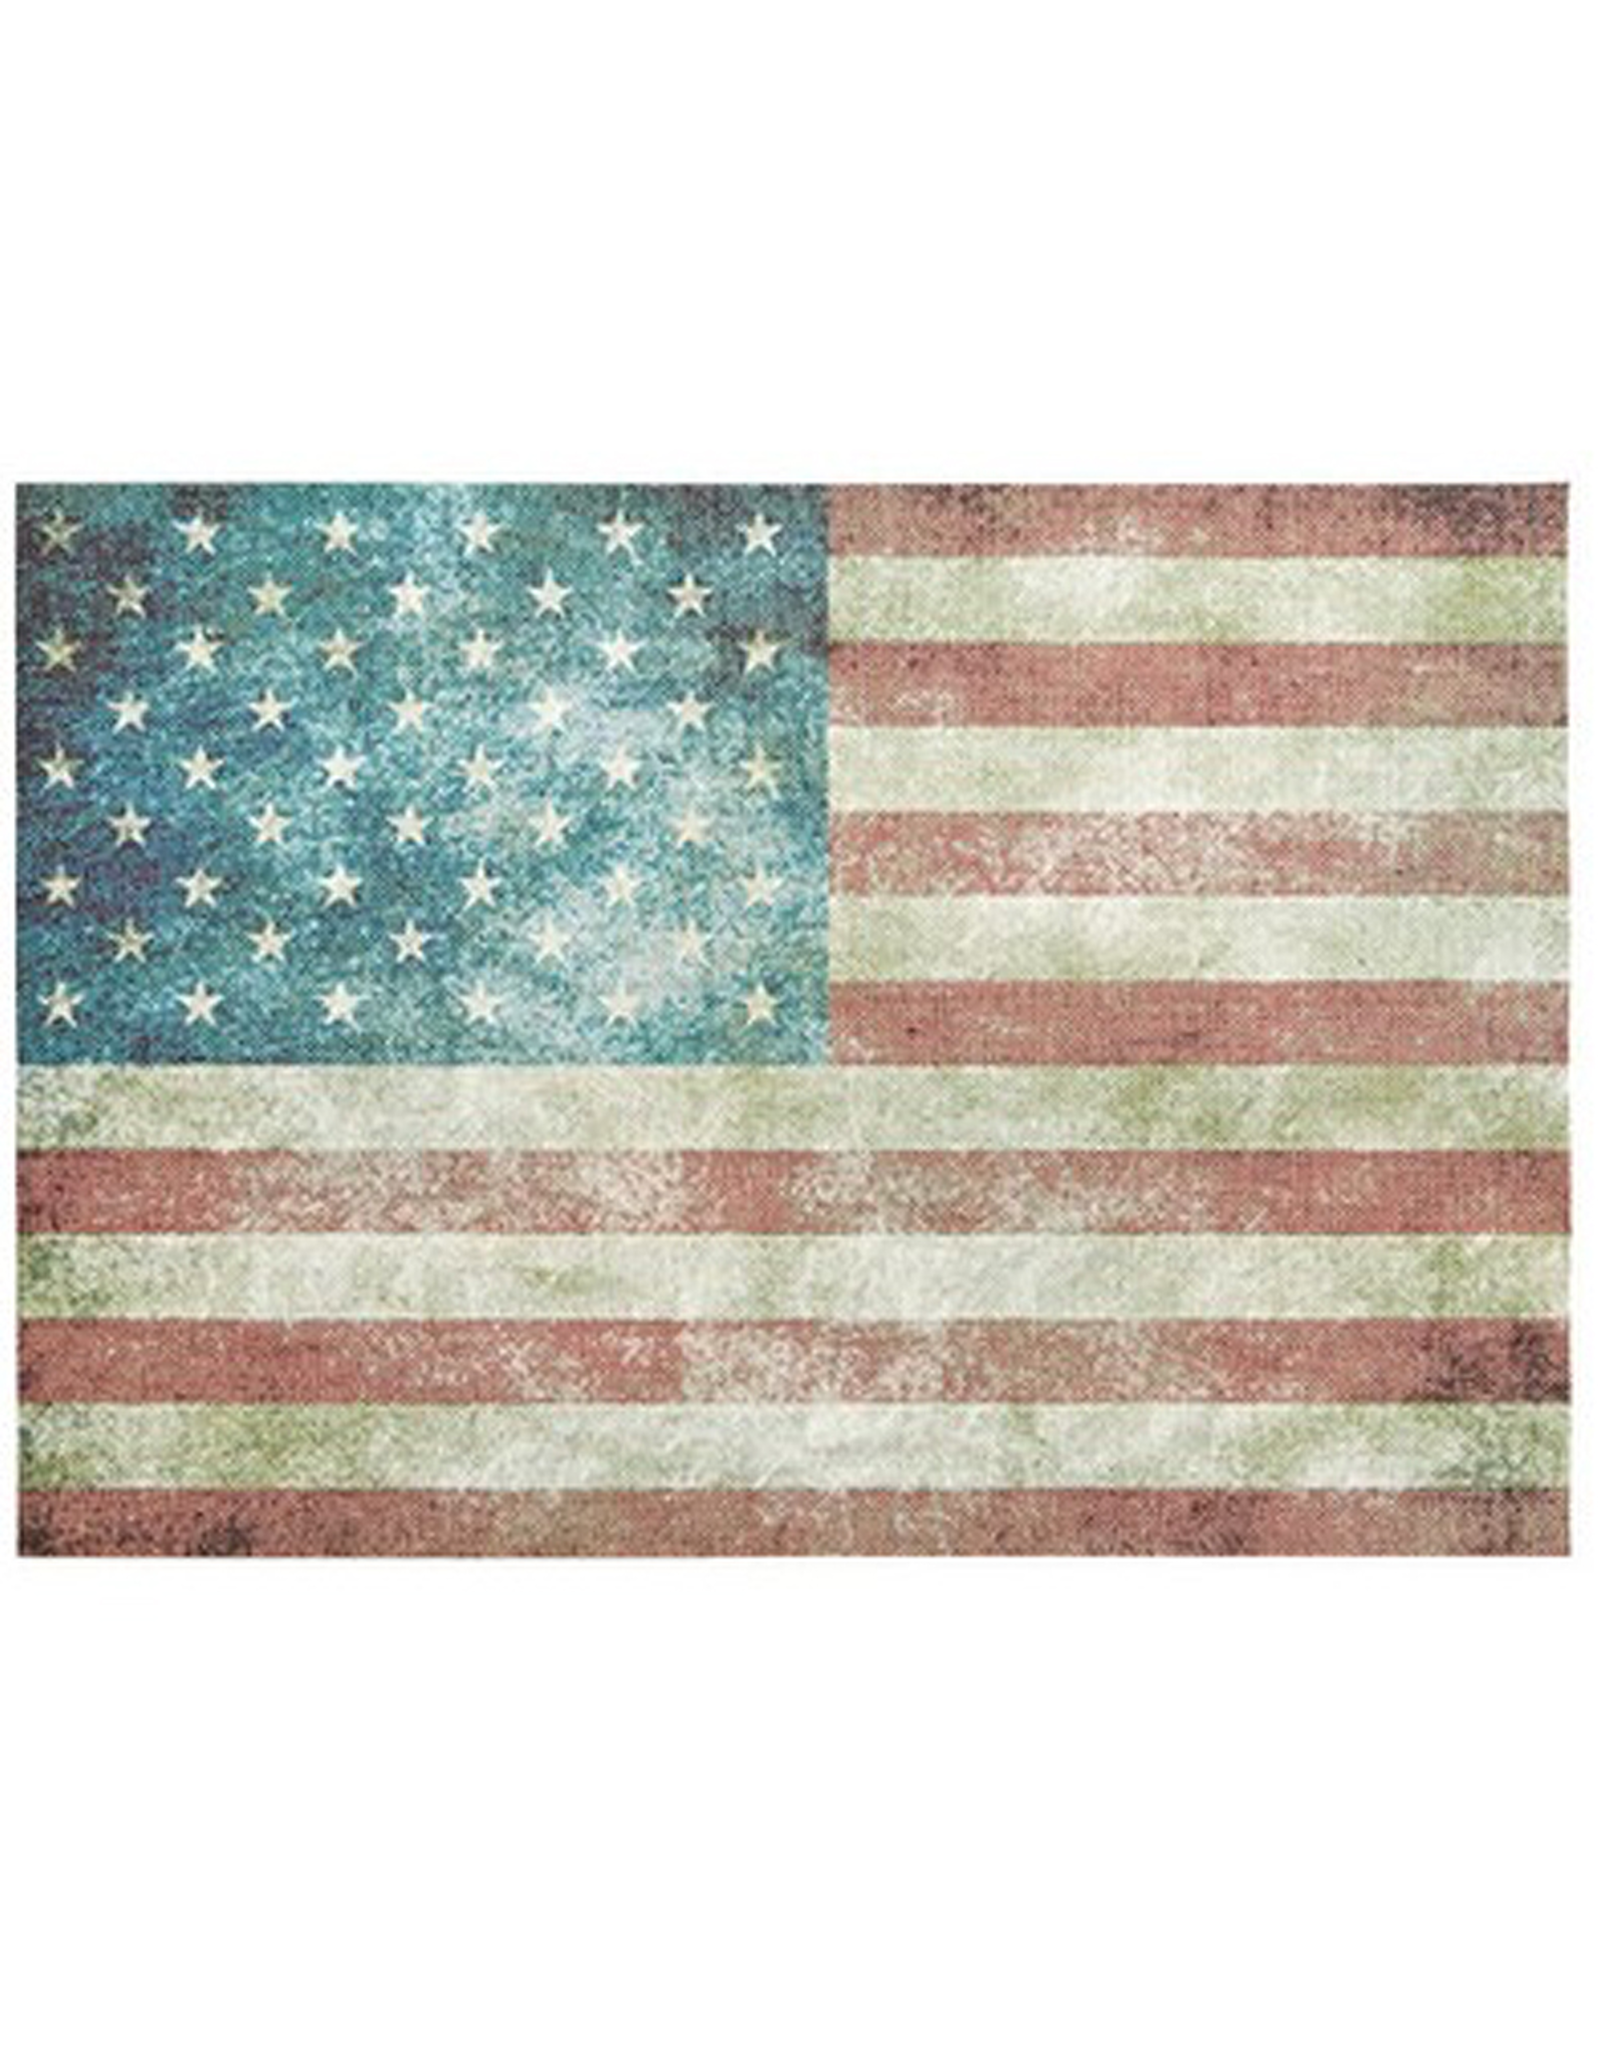 Vinyl Placemat 13x19 Inch American Flag Stars and Stripes